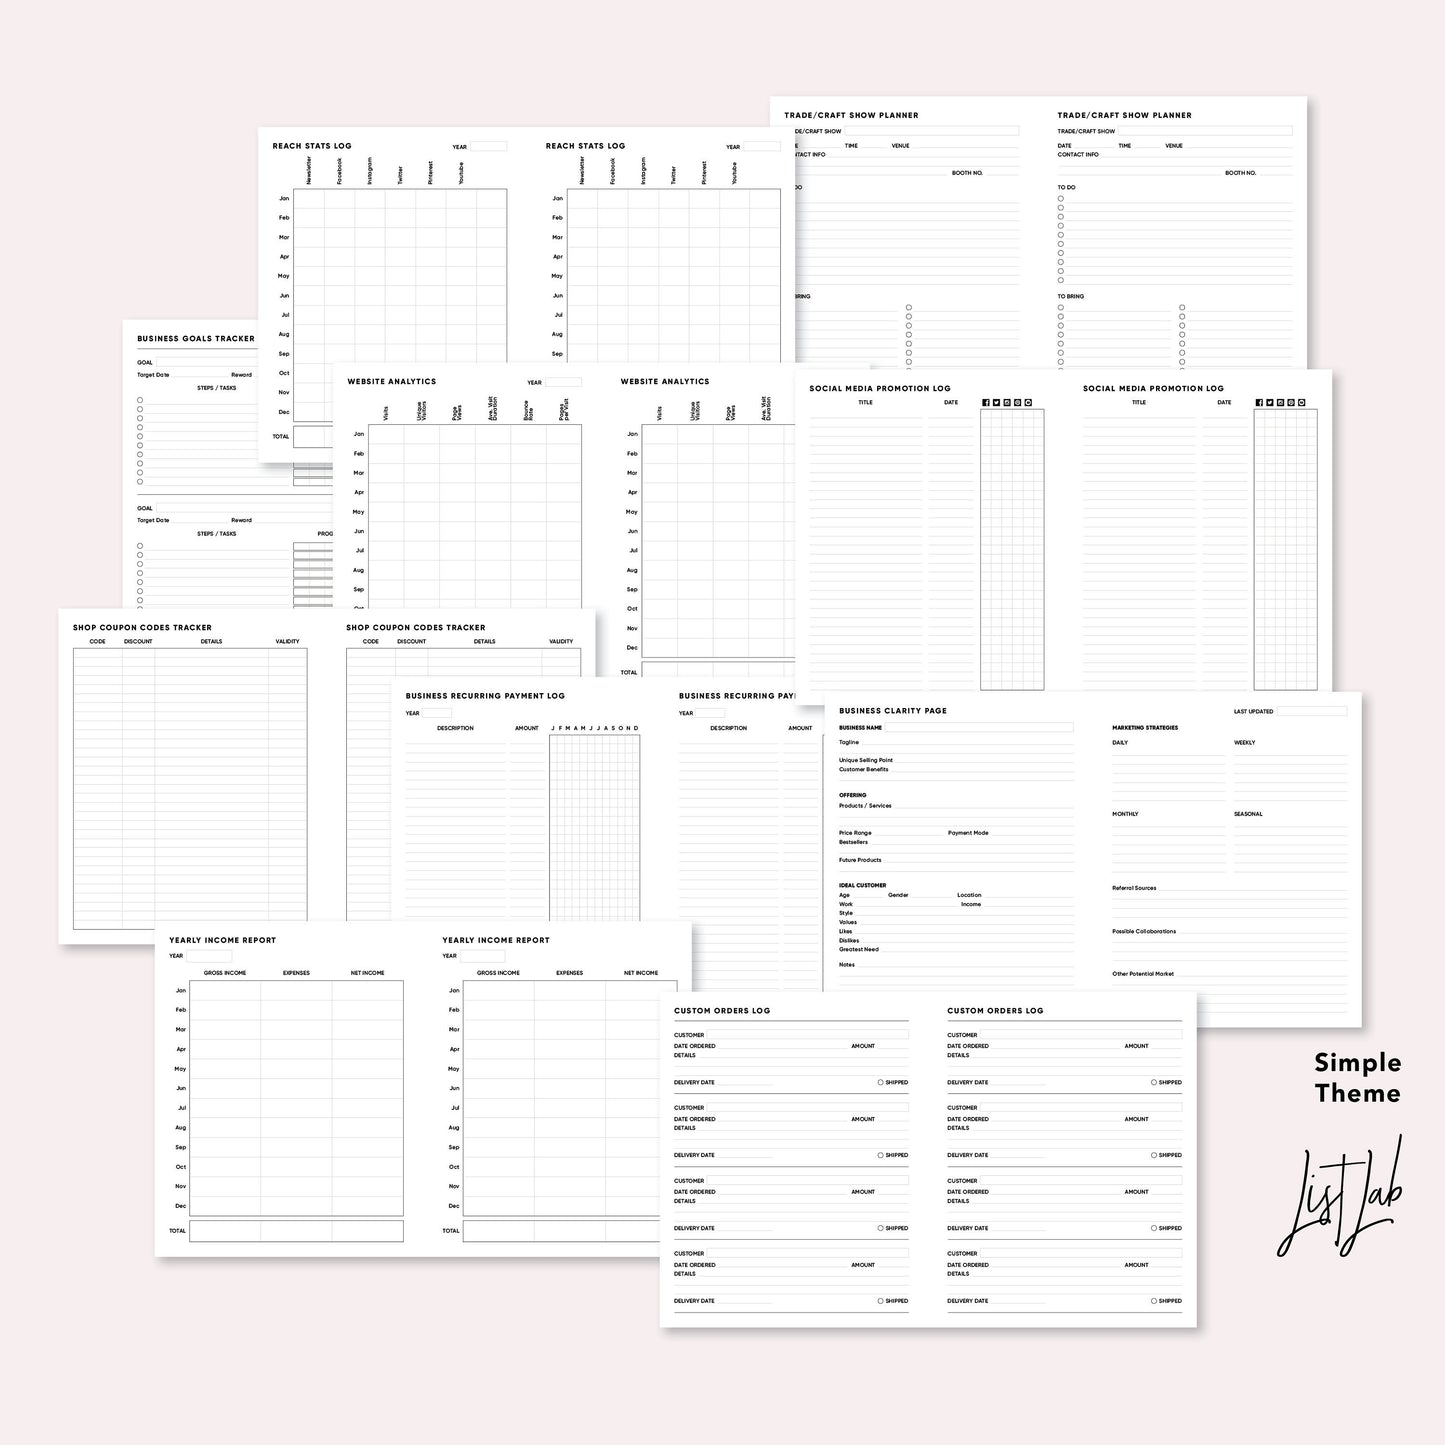 ECLP / A5 Wide Ring SMALL BUSINESS KIT Printable Planner Insert Set